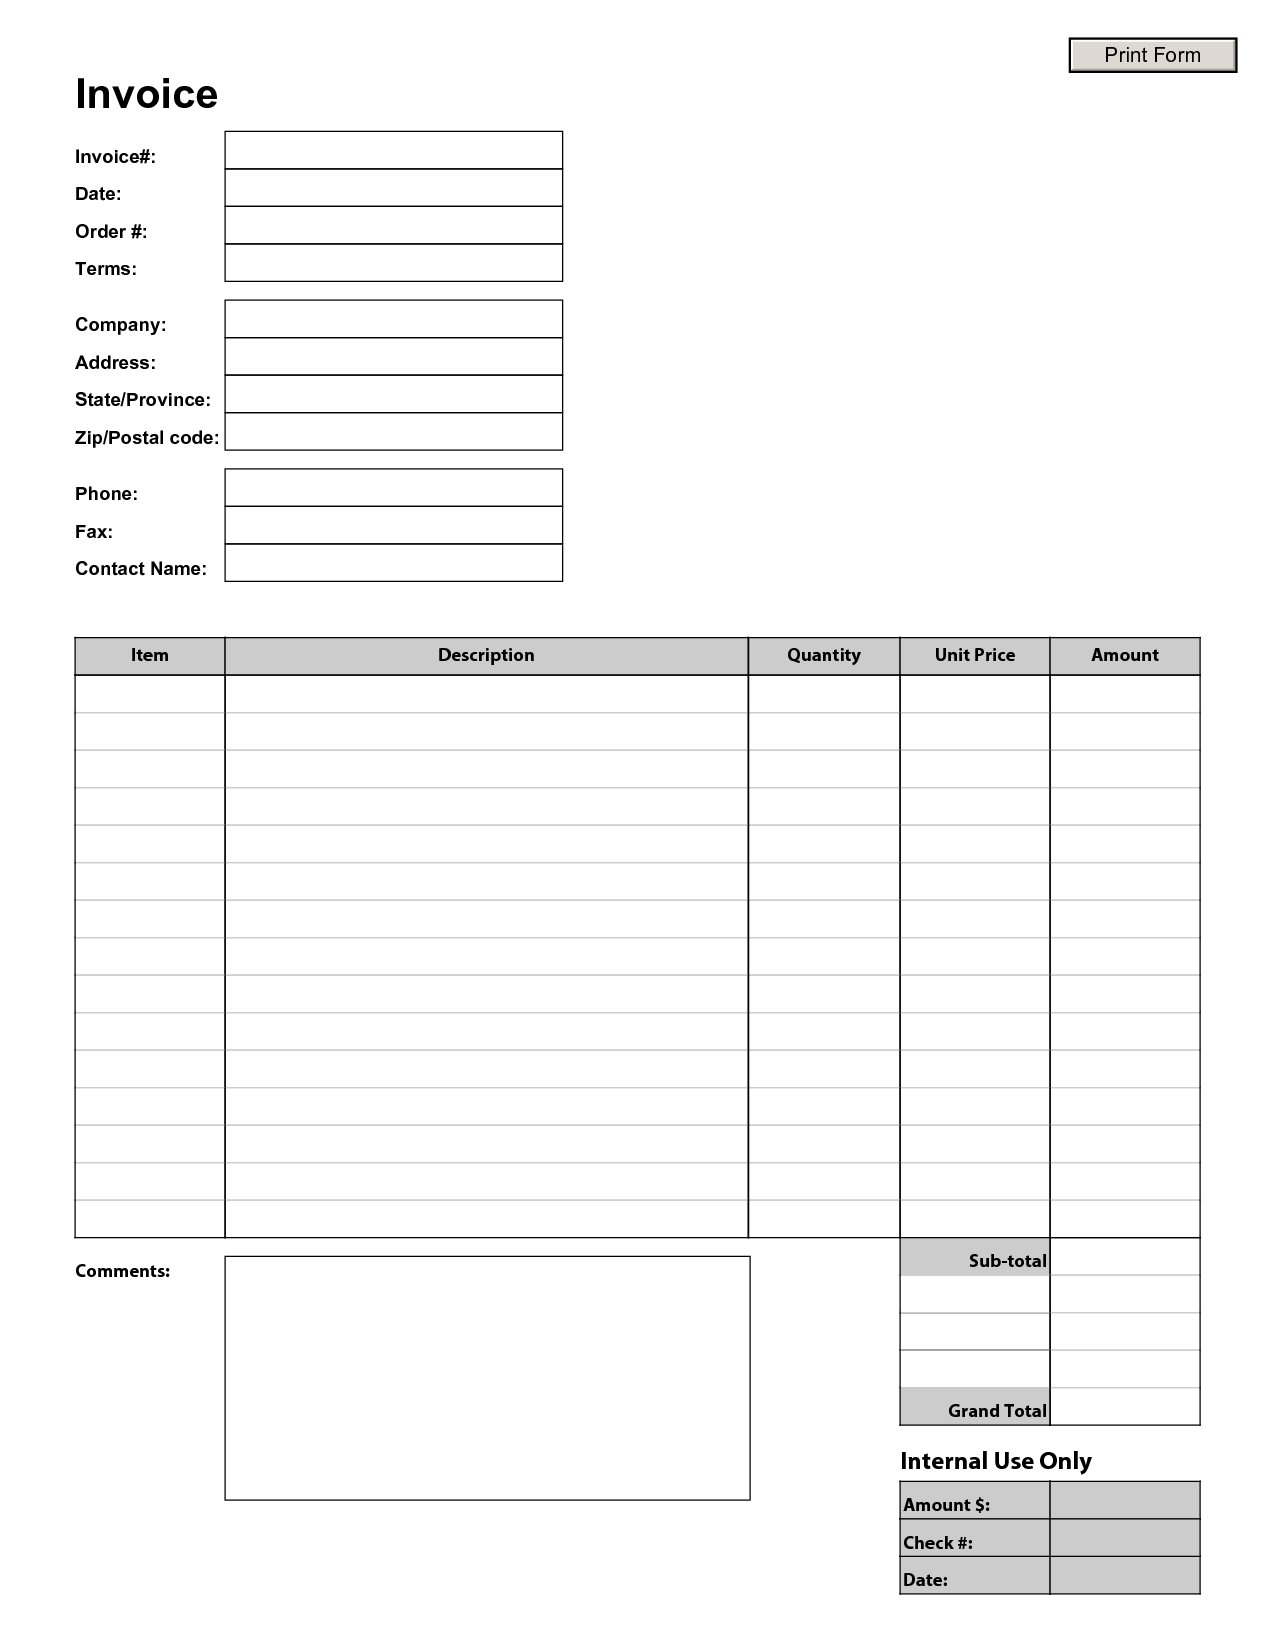 8-best-images-of-invoice-free-printable-order-forms-free-printable